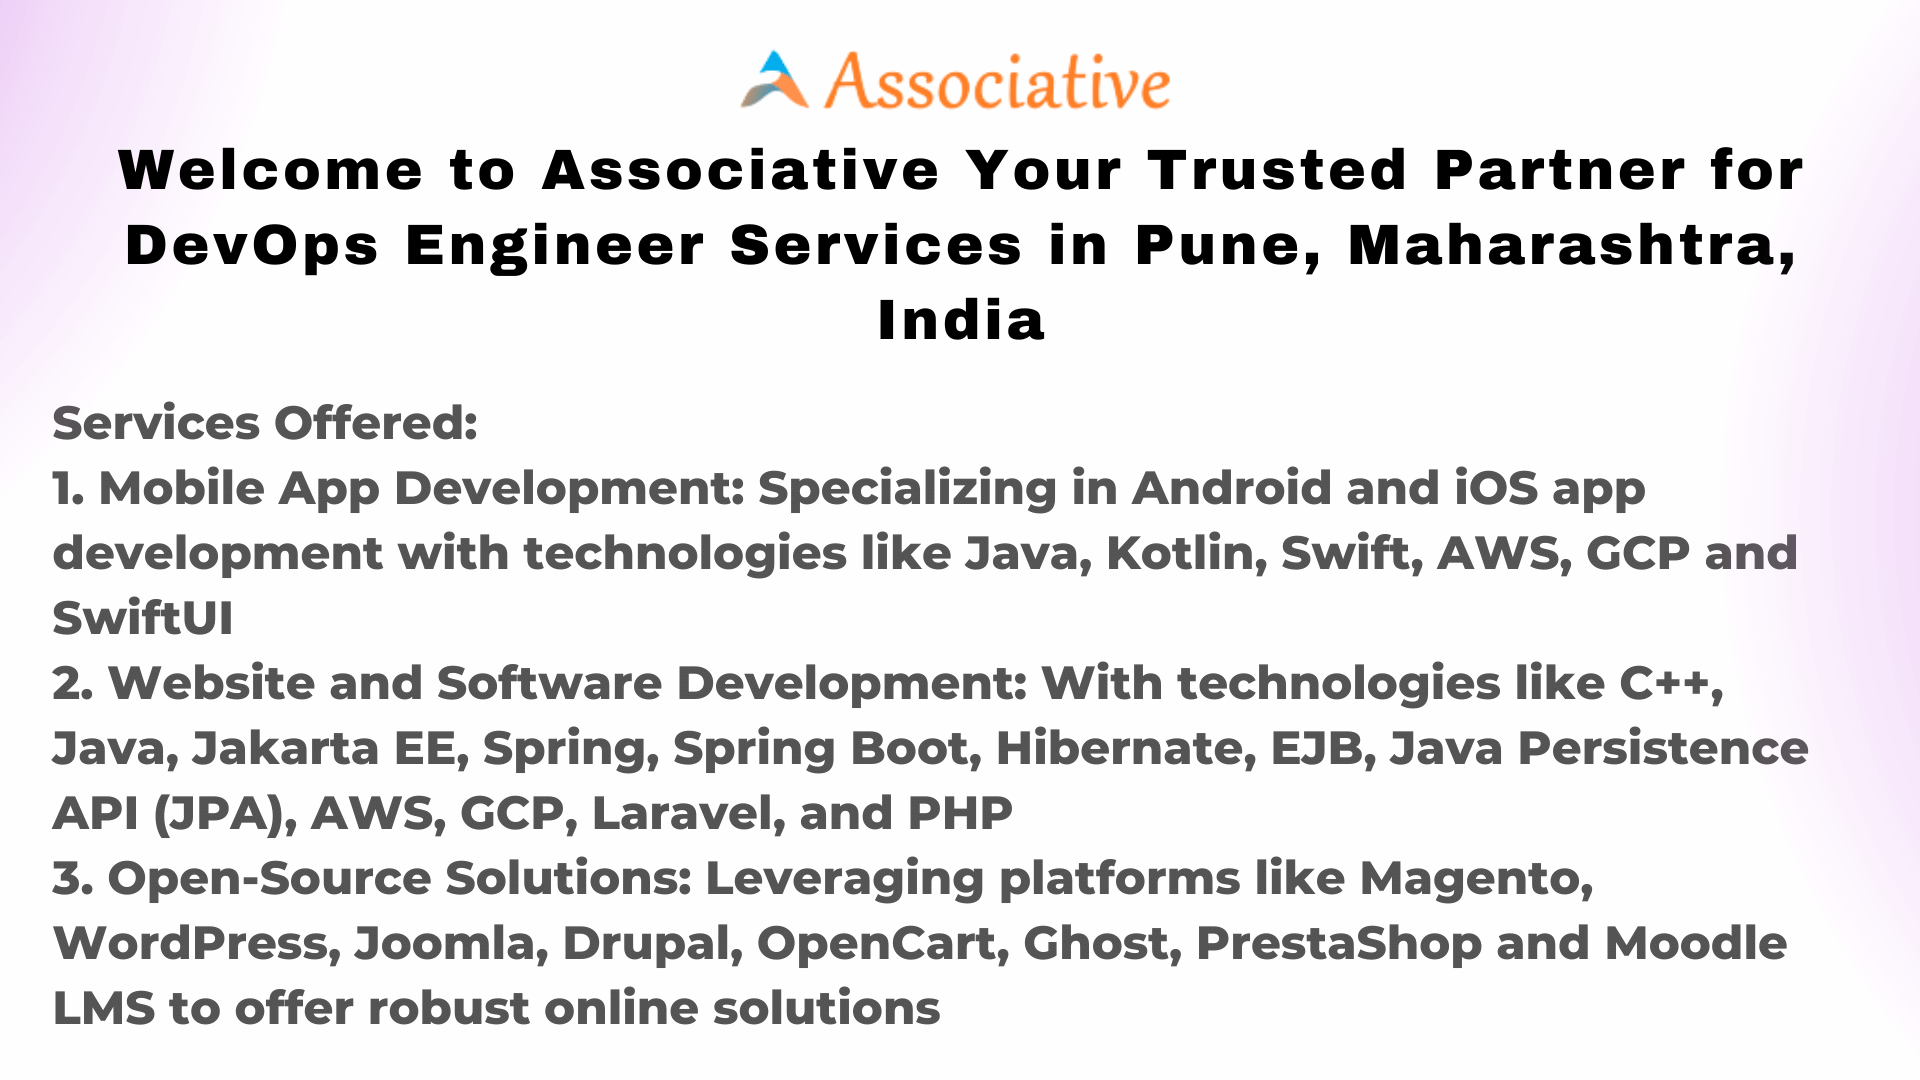 Welcome to Associative Your Trusted Partner for DevOps Engineer Services in Pune Maharashtra India